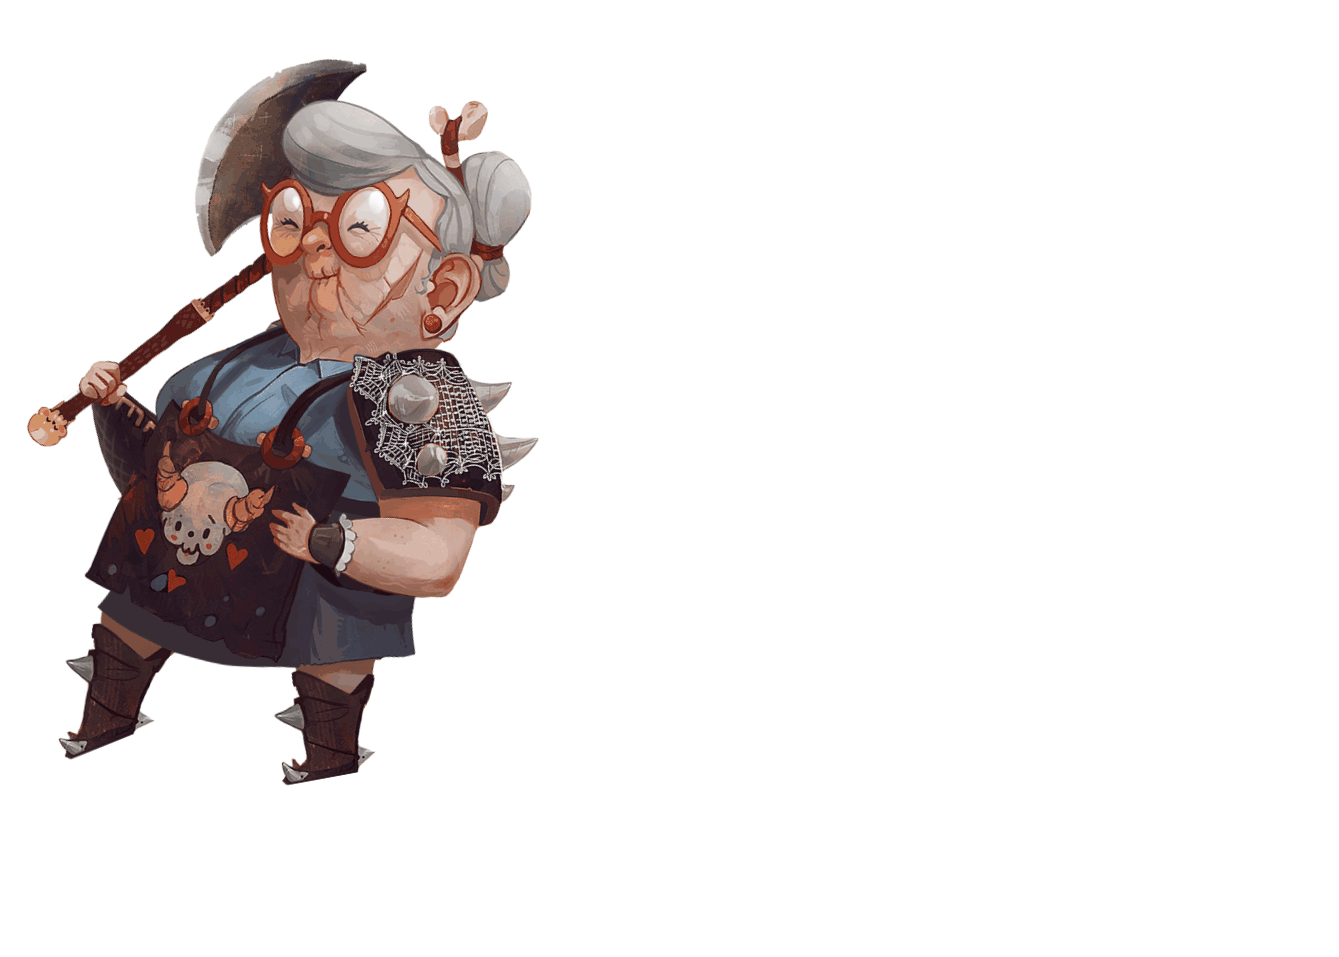 Old Lady Spine Animations on Behance